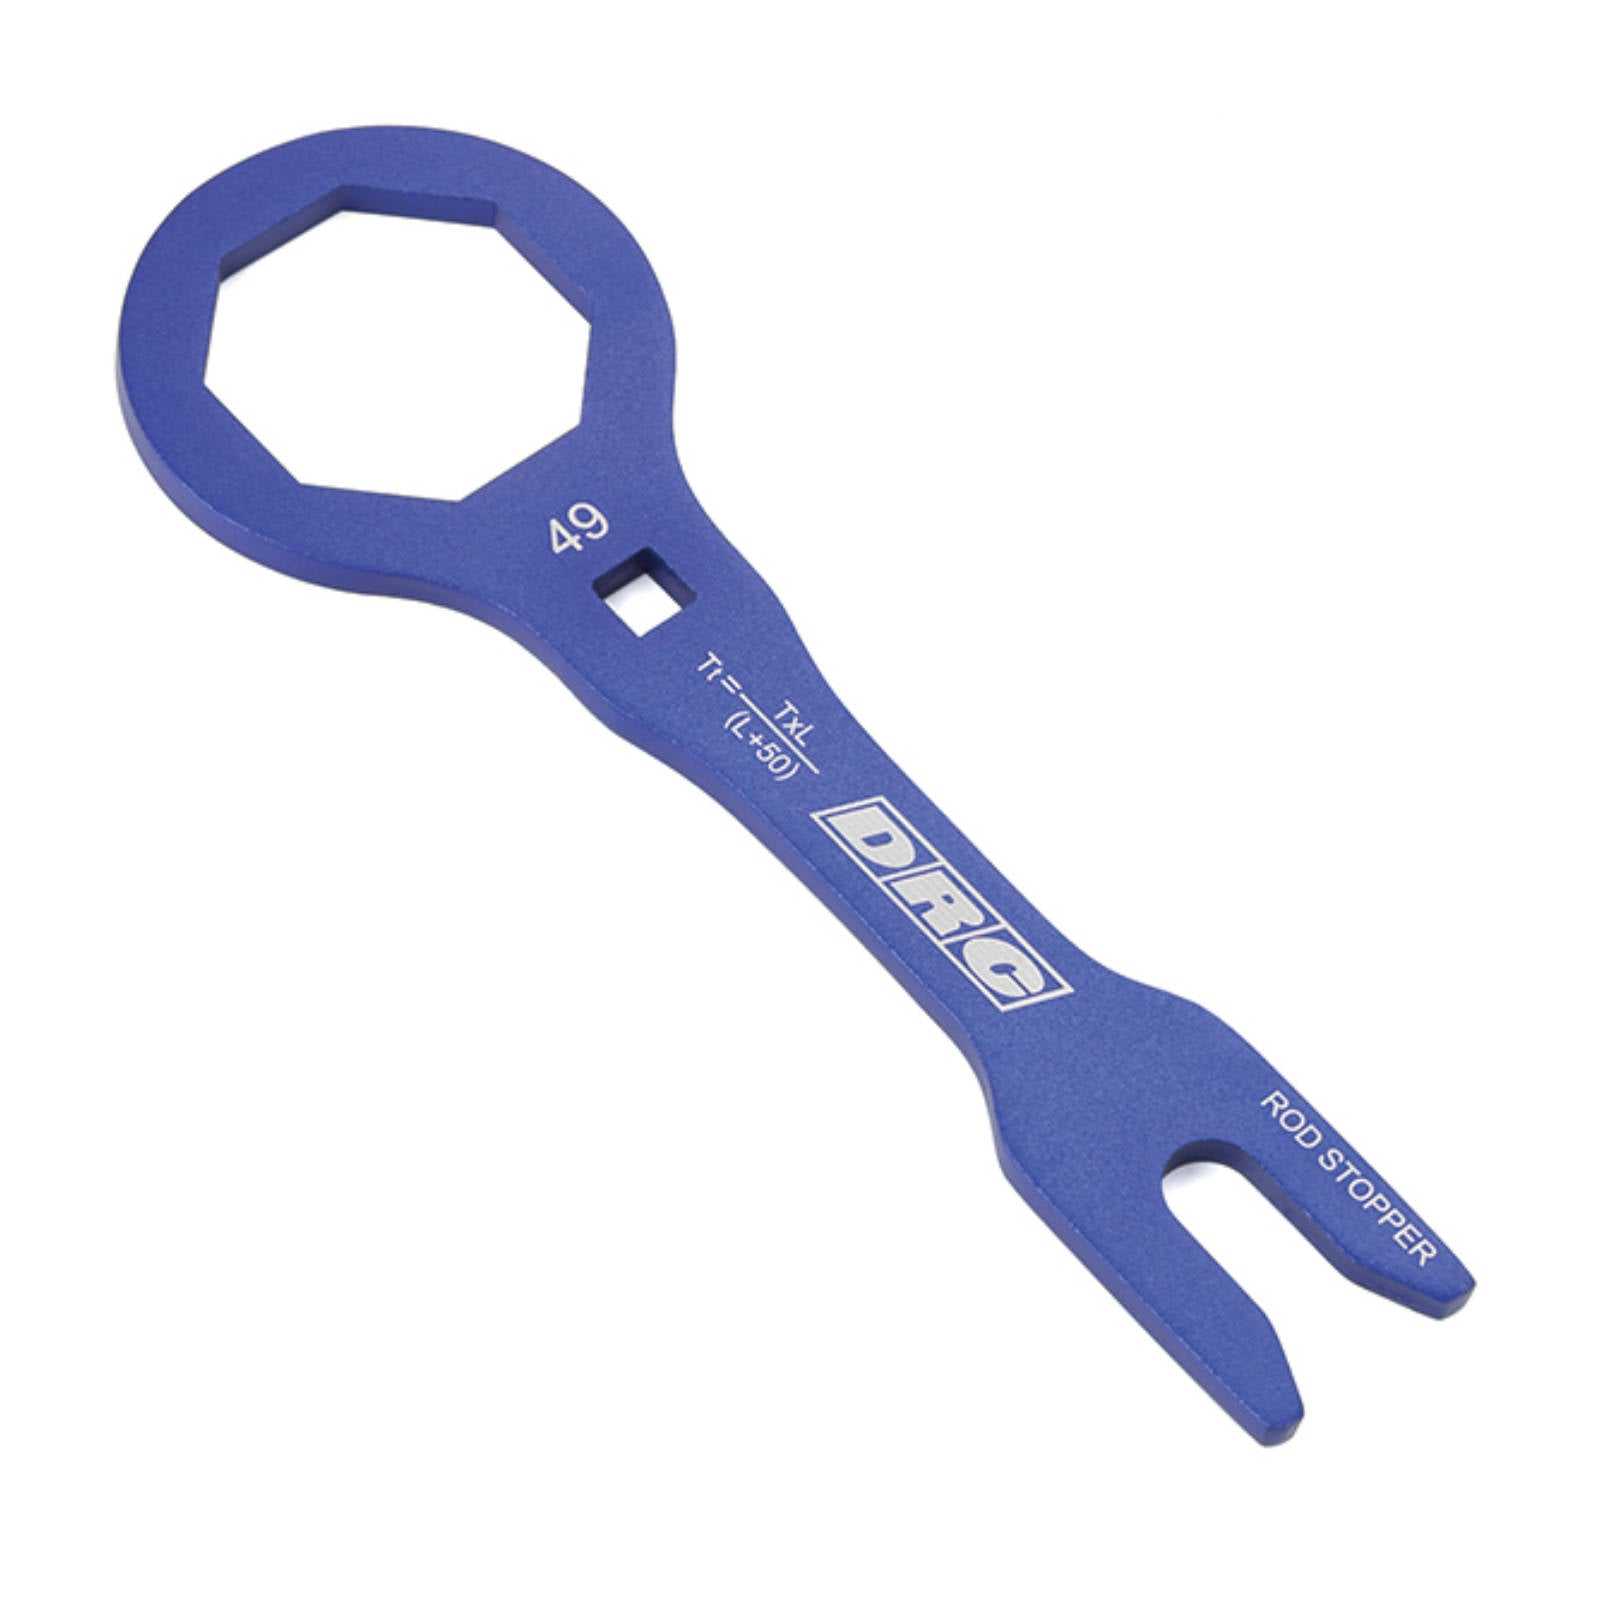 DRC, DRC PRO FORK CAP WRENCH KYB 49MM BLUE